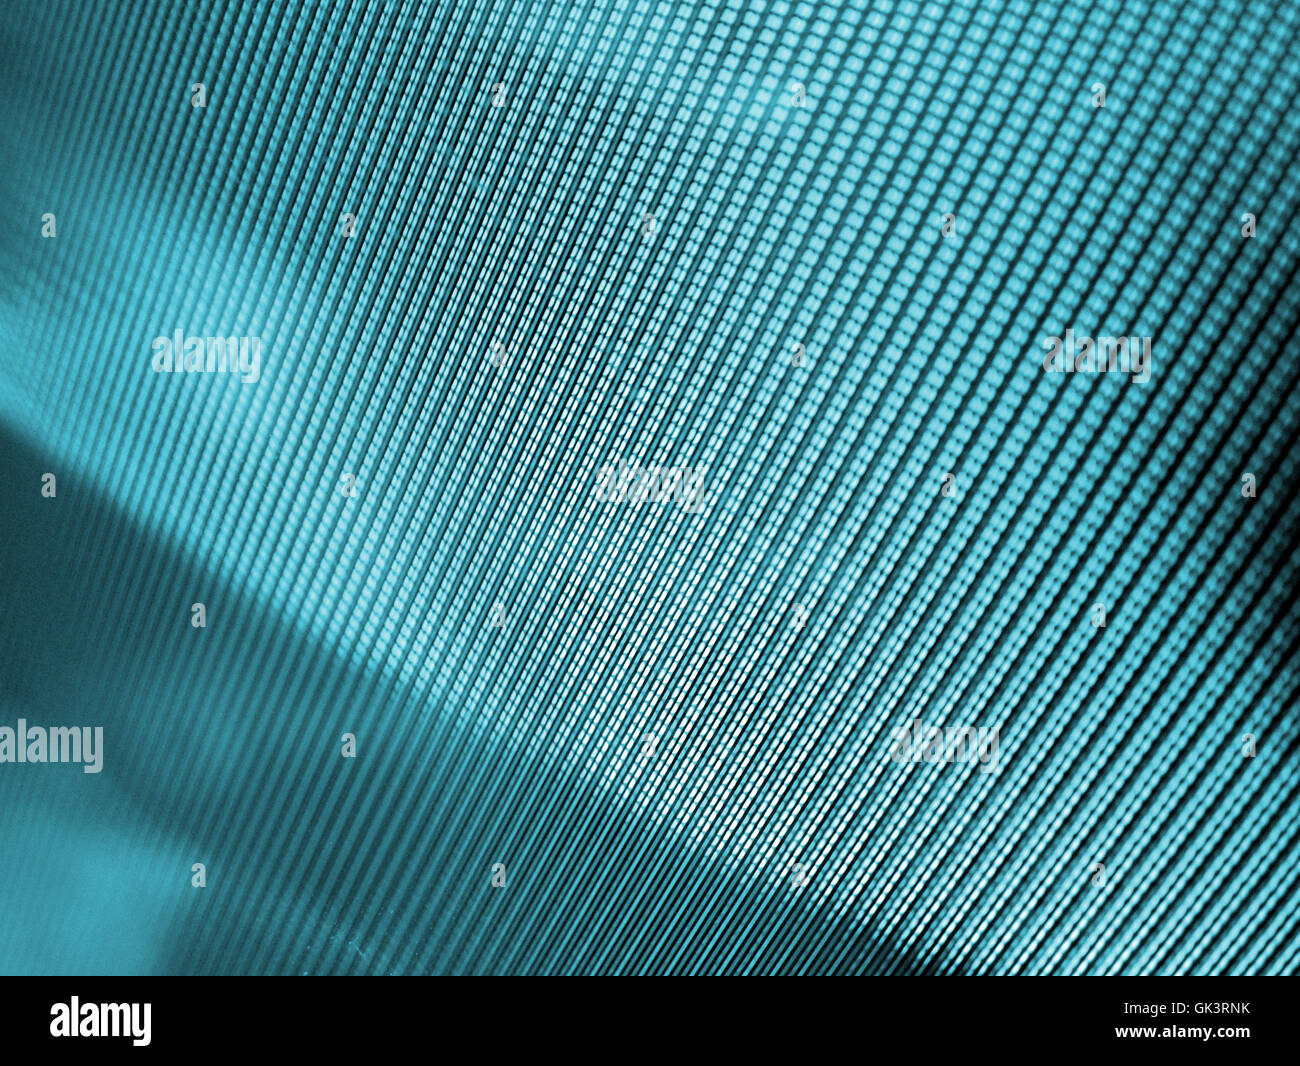 Crt Monitor Texture High Resolution Stock Photography and Images - Alamy